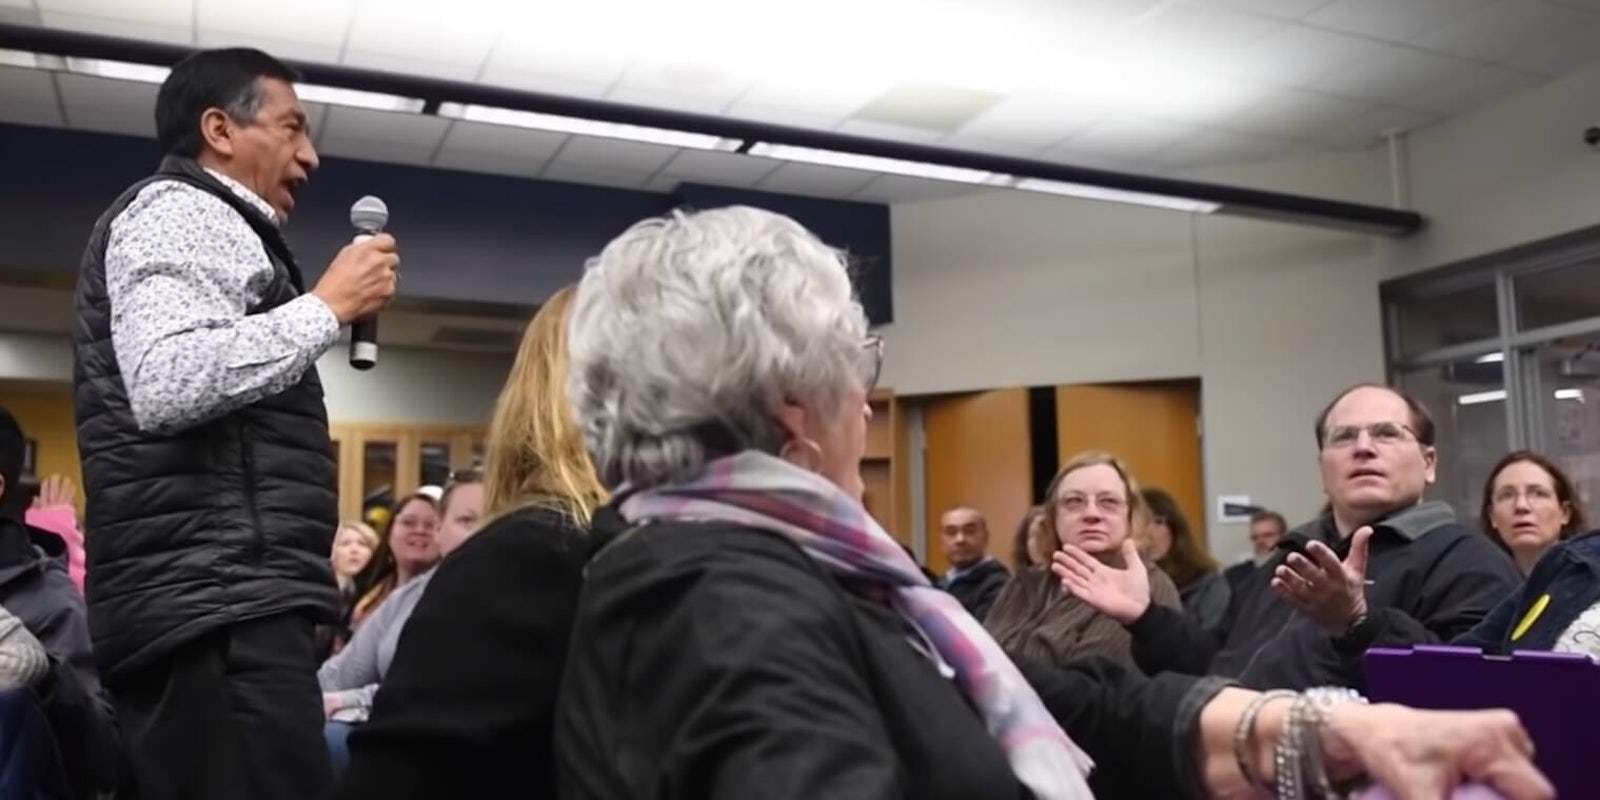 Tom Burtell seen shrugging after asking a racist question Adrian Iraola